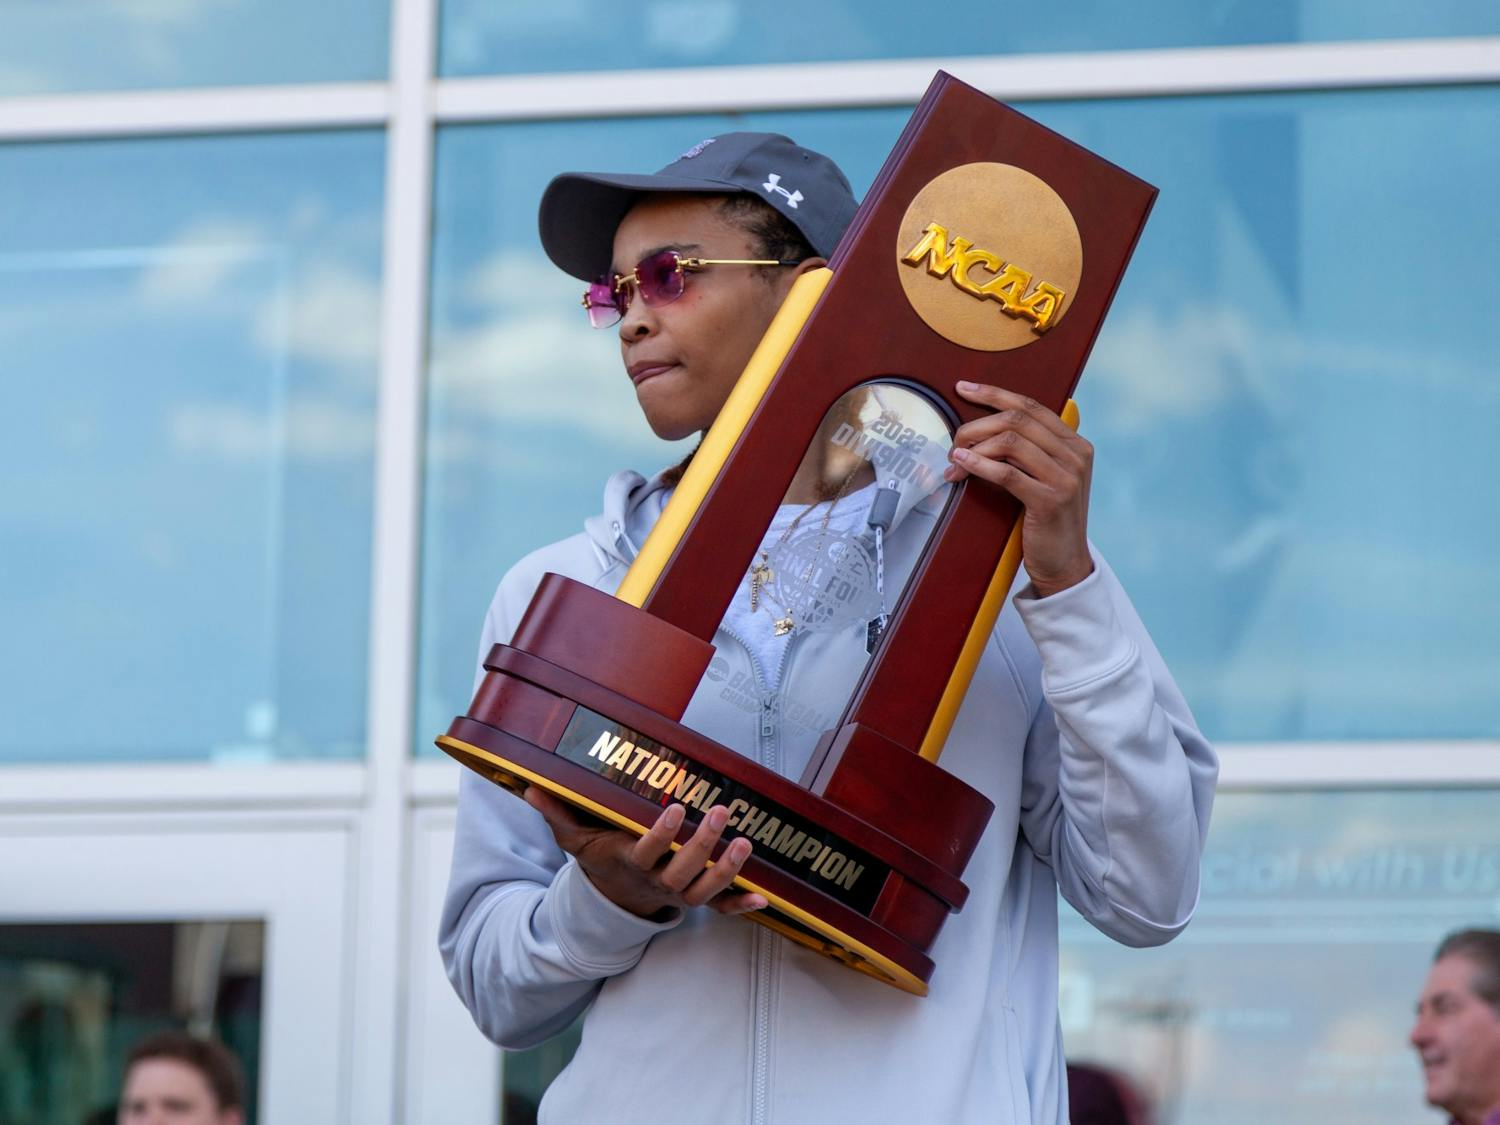 South Carolina graduate guard Lele Grissett walks onto the stage with the NCAA championship trophy on April 4, 2022 at Colonial Life Arena in Columbia, SC. Many fans gathered outside of the arena for the team's return to Columbia.